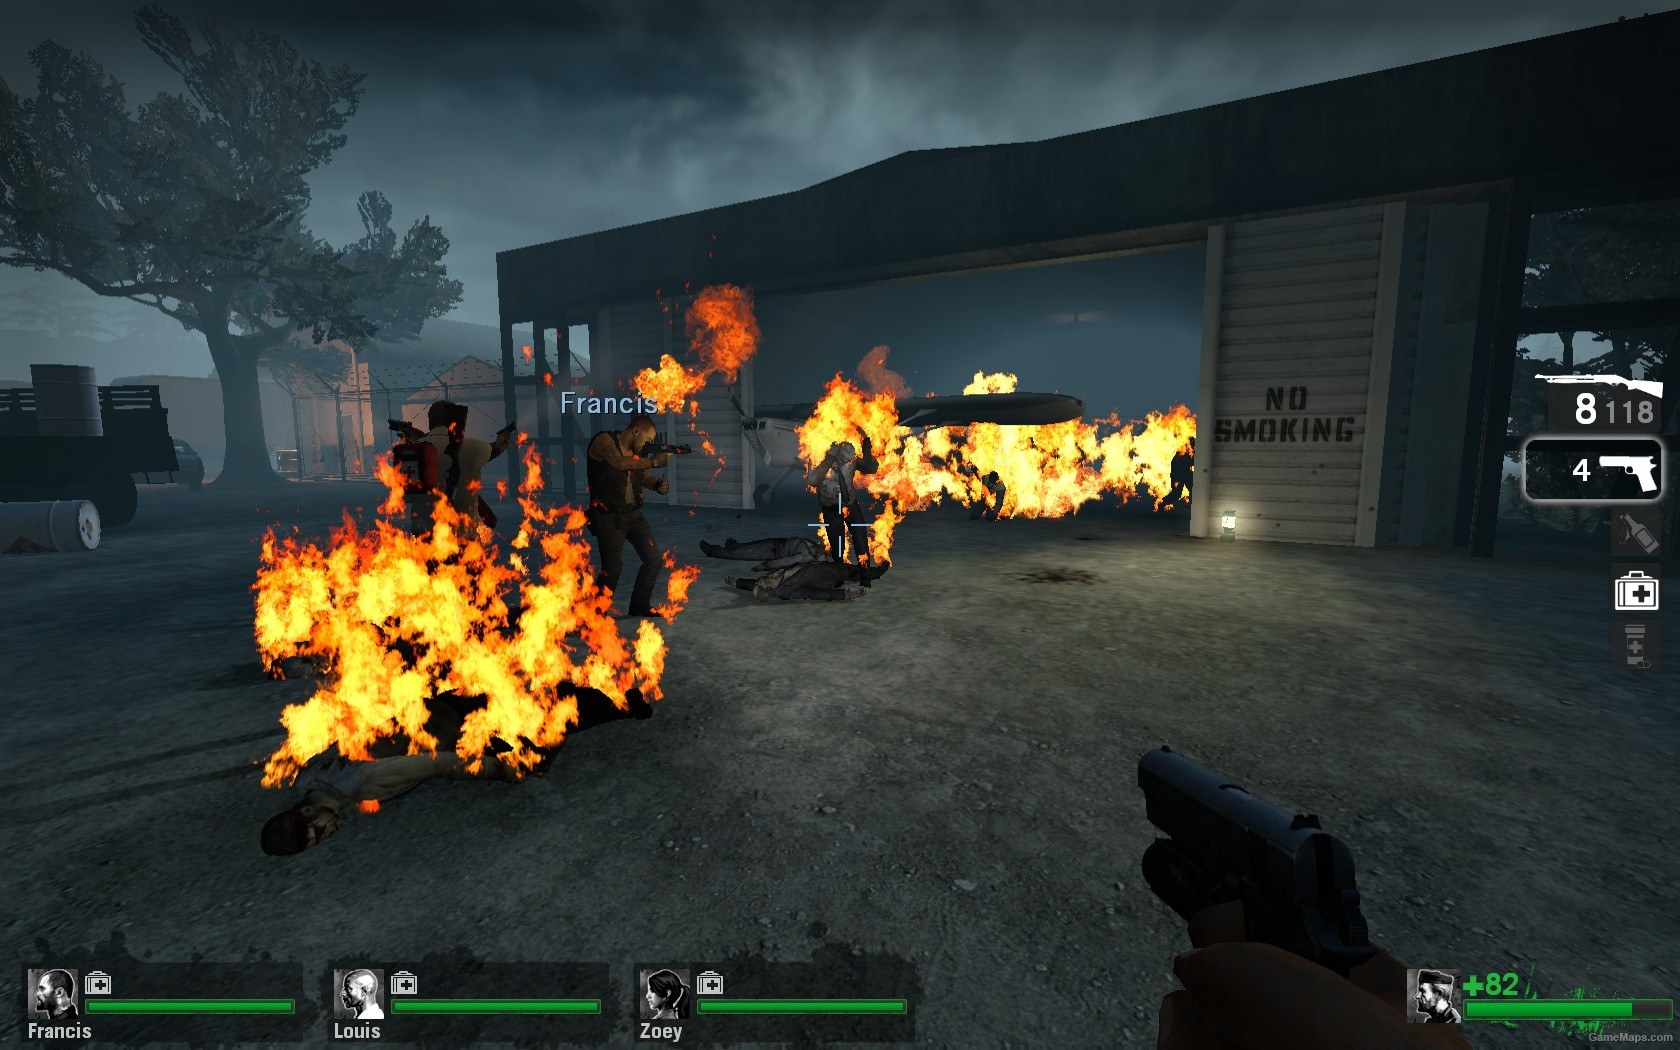 left for dead pc game